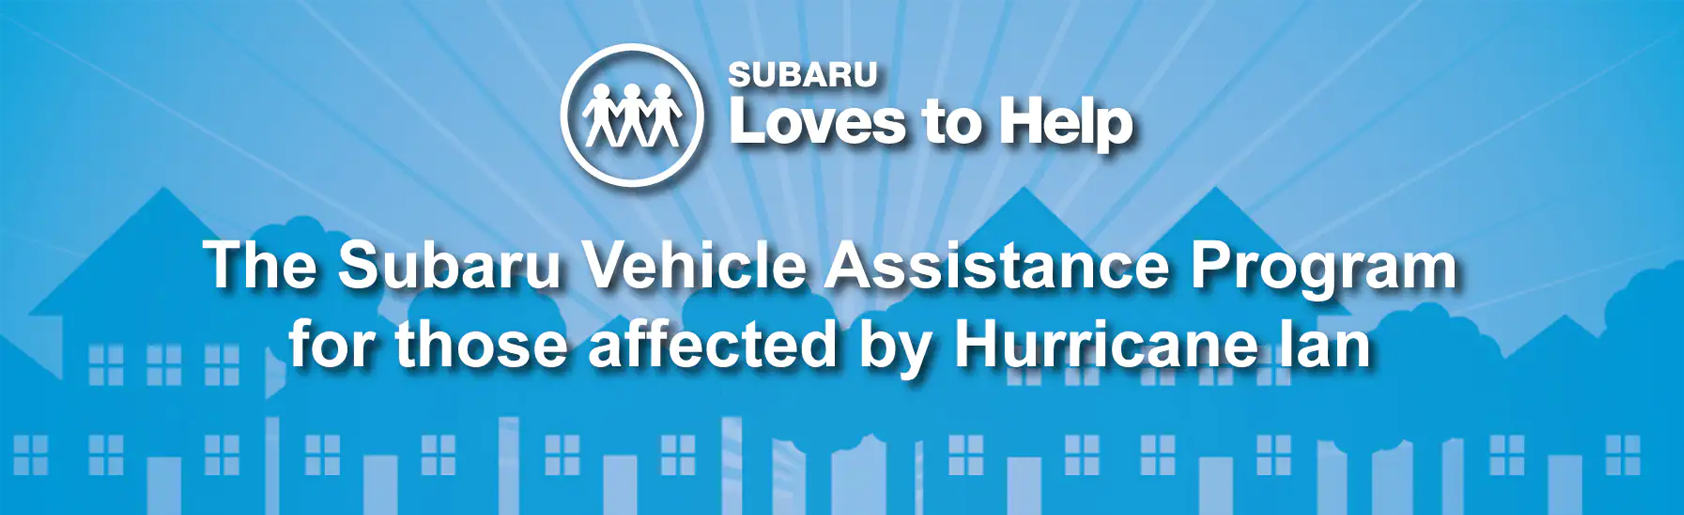 Subaru Loves to Help - The Subaru Assistance Program for those affected by Hurricane Ian